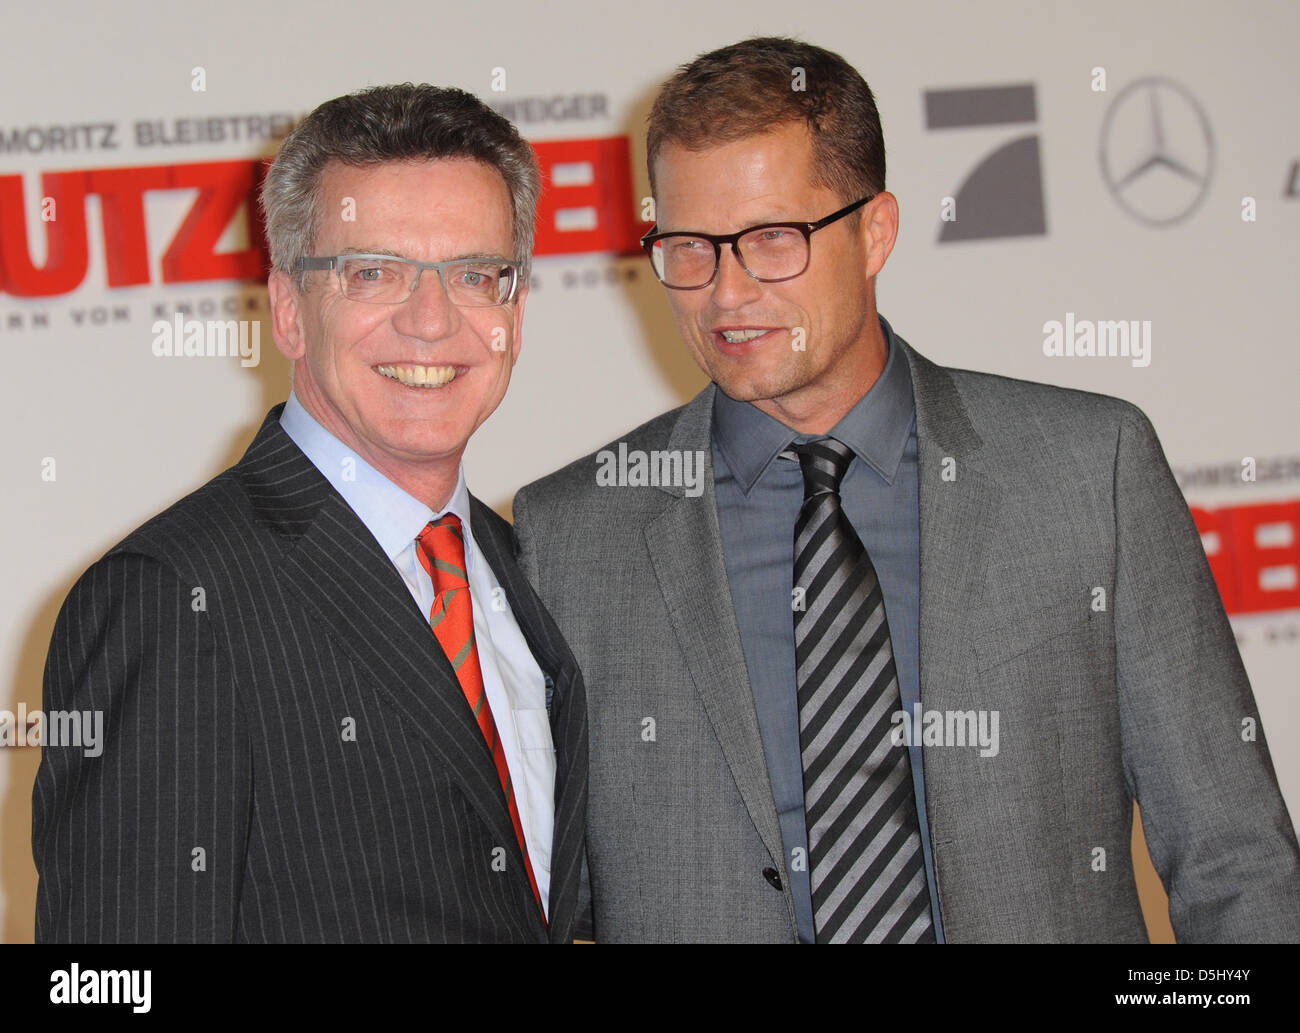 German Minister of Defence Thomas de Maiziere  (CDU, L) and actor Til Schweiger pose on the red carpet at the premiere of the movie 'Guardian Angel' (Schutzengel) in Berlin, Germany, 18 September 2012. The movie will start showing in German cinemas on 27 September 2012. Photo: Britta Pedersen Stock Photo